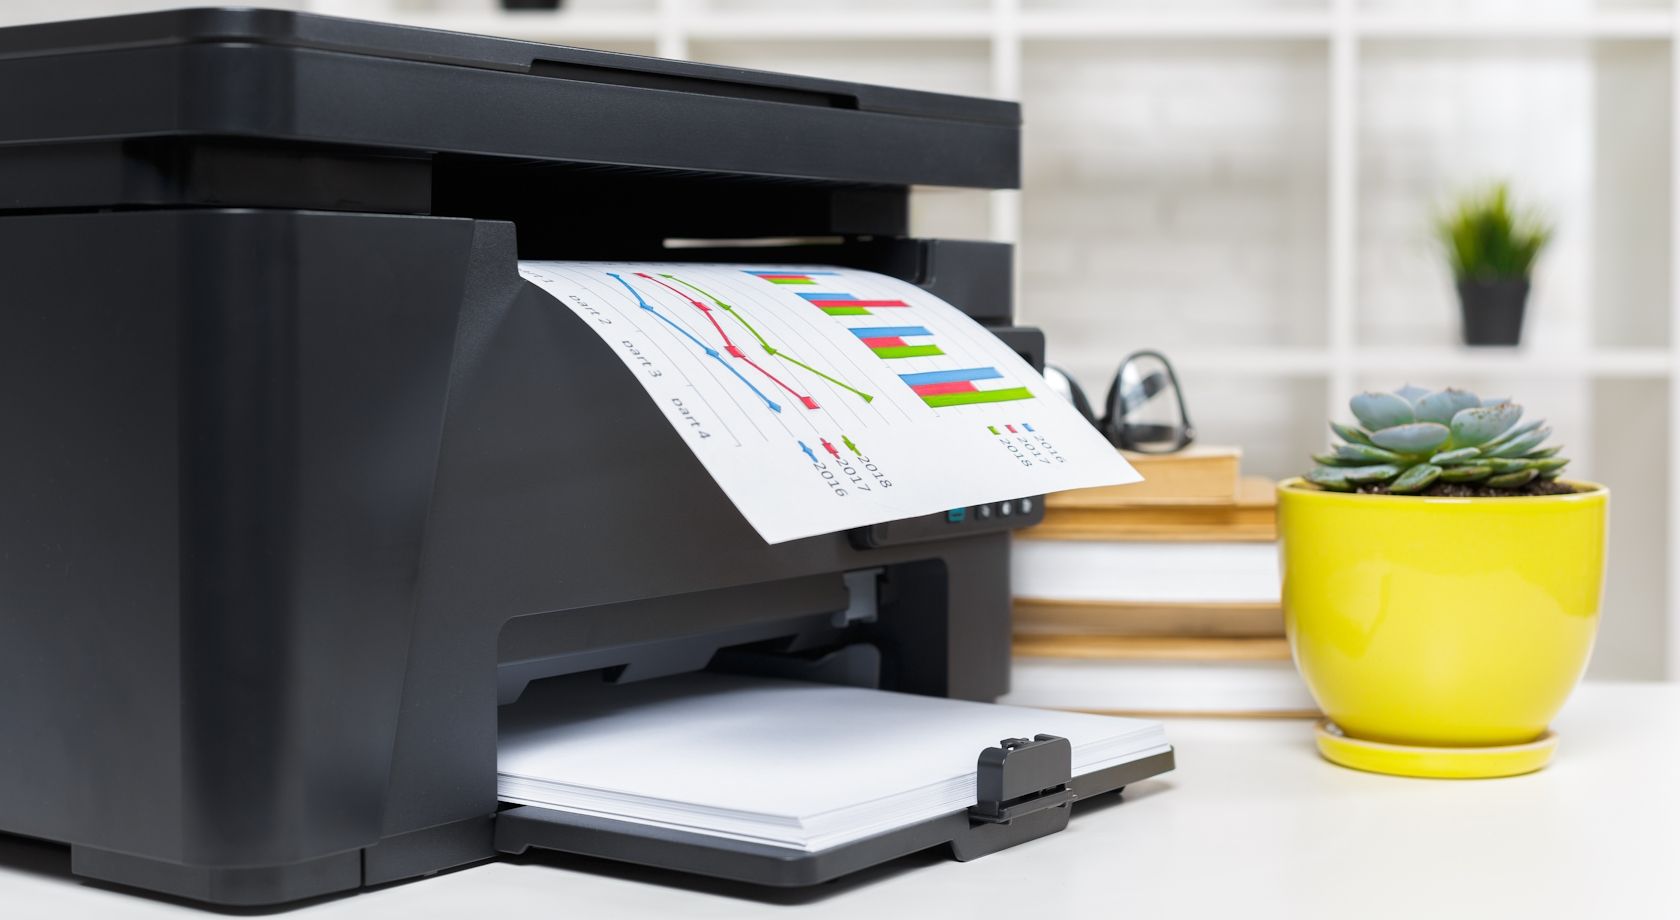 A printer on a desk printing out a document